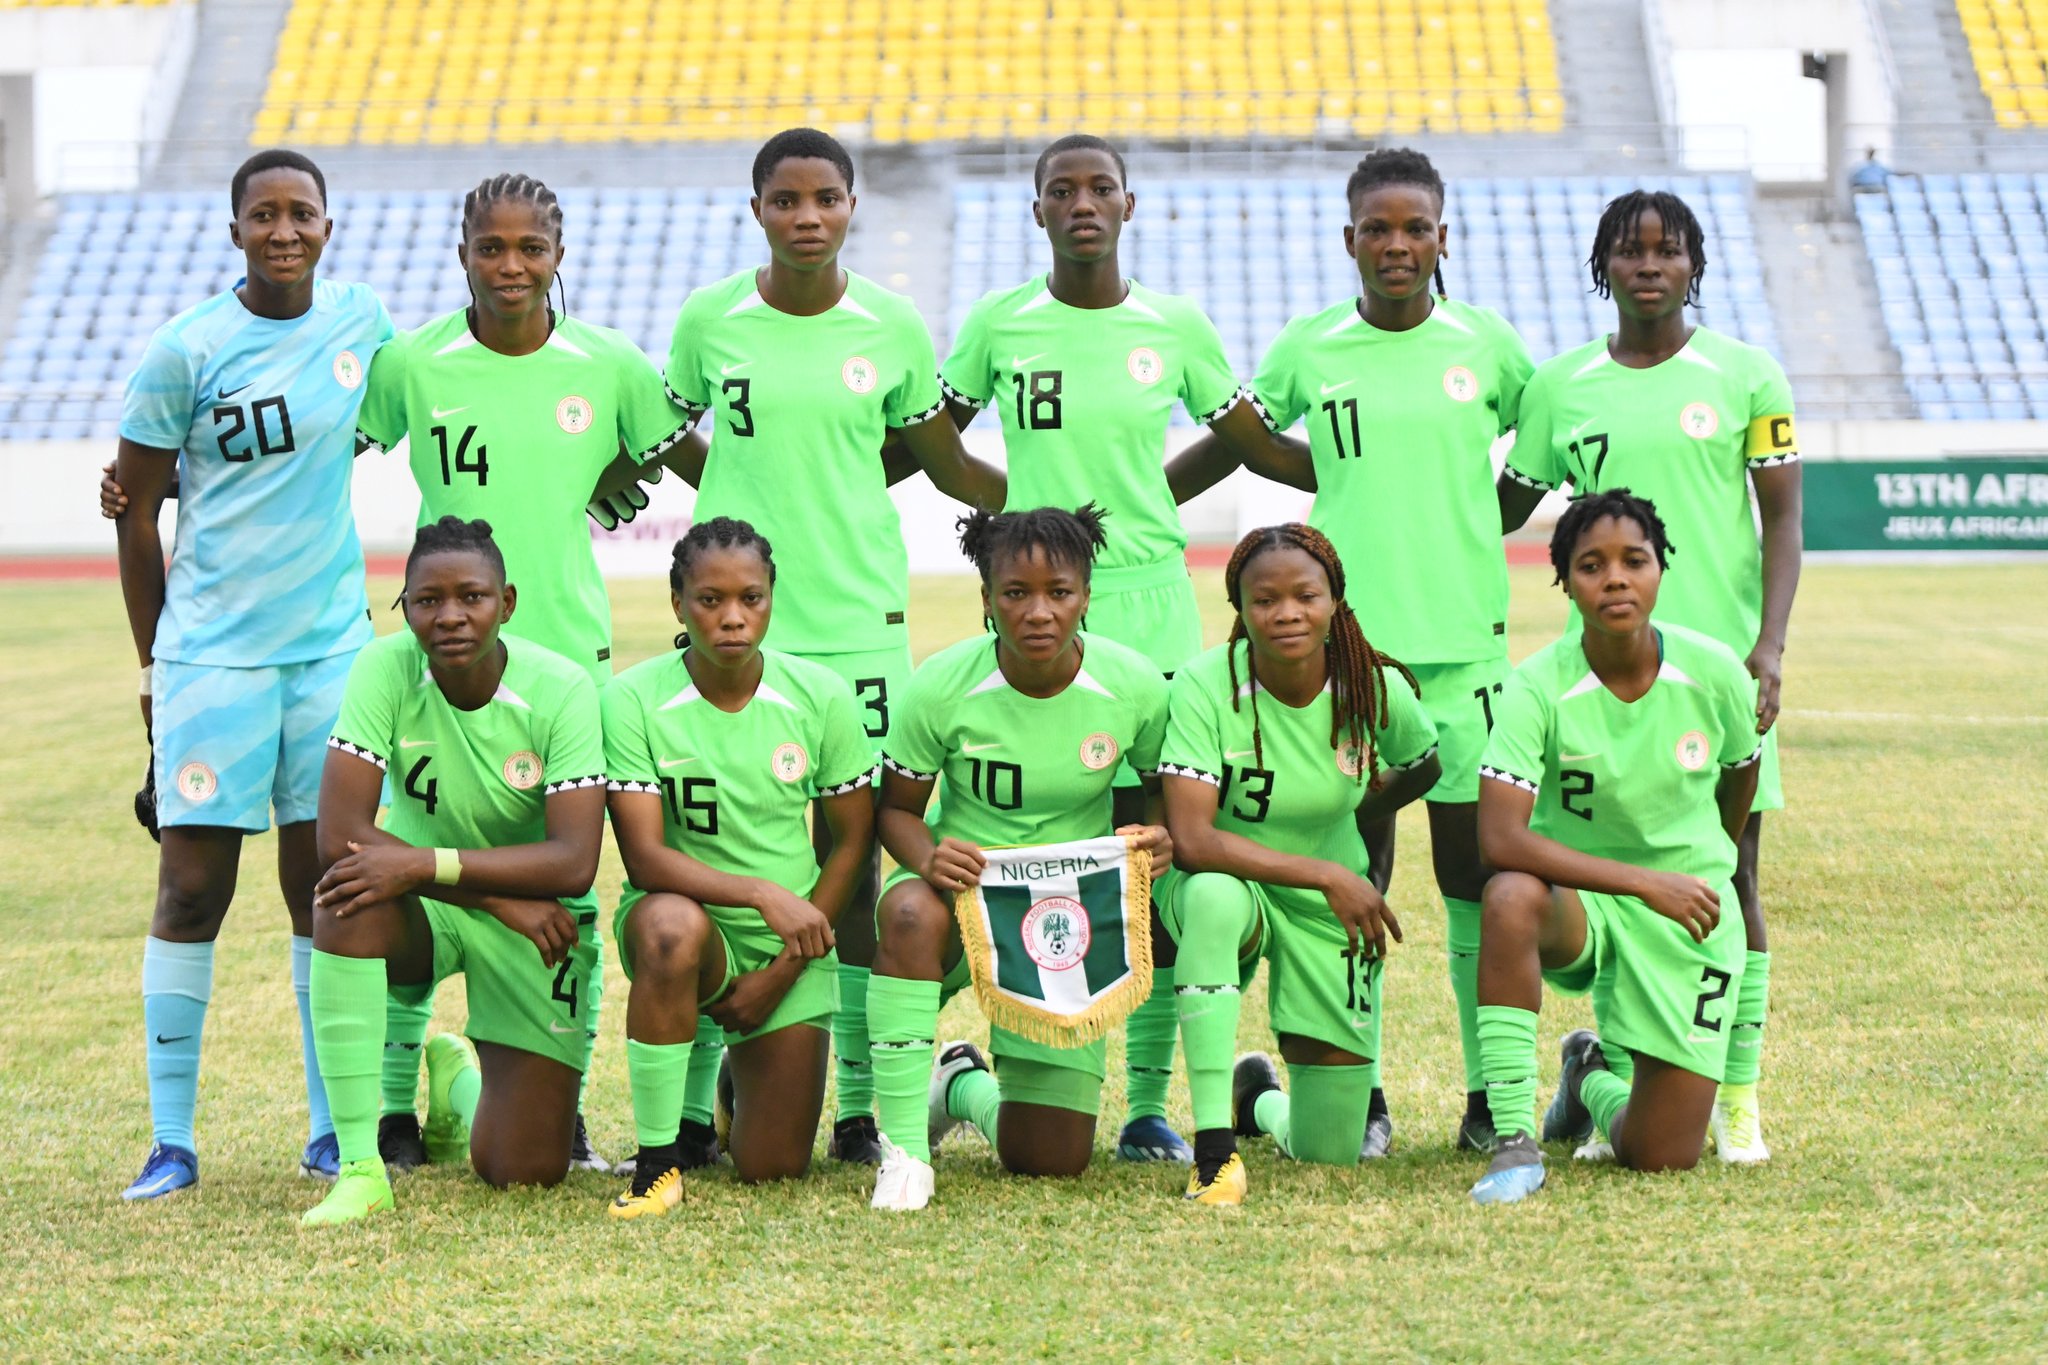 African Games '23: Ghana pick gold at Nigeria's expense in women's football